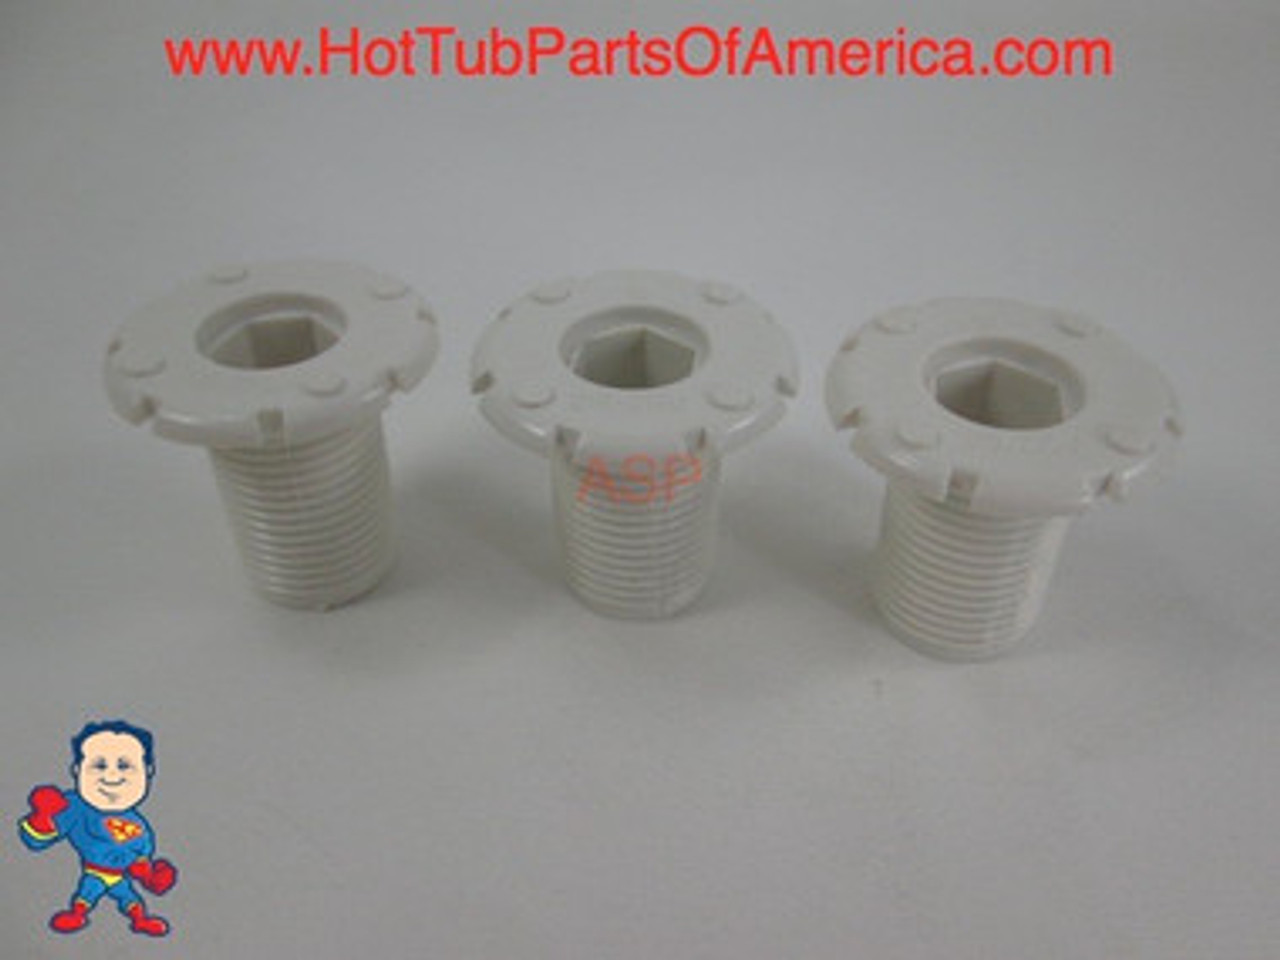 3X Spa Hot Tub 1 1/4" Air Jet Face Flange Fitting 3/4" Thread Injector Part